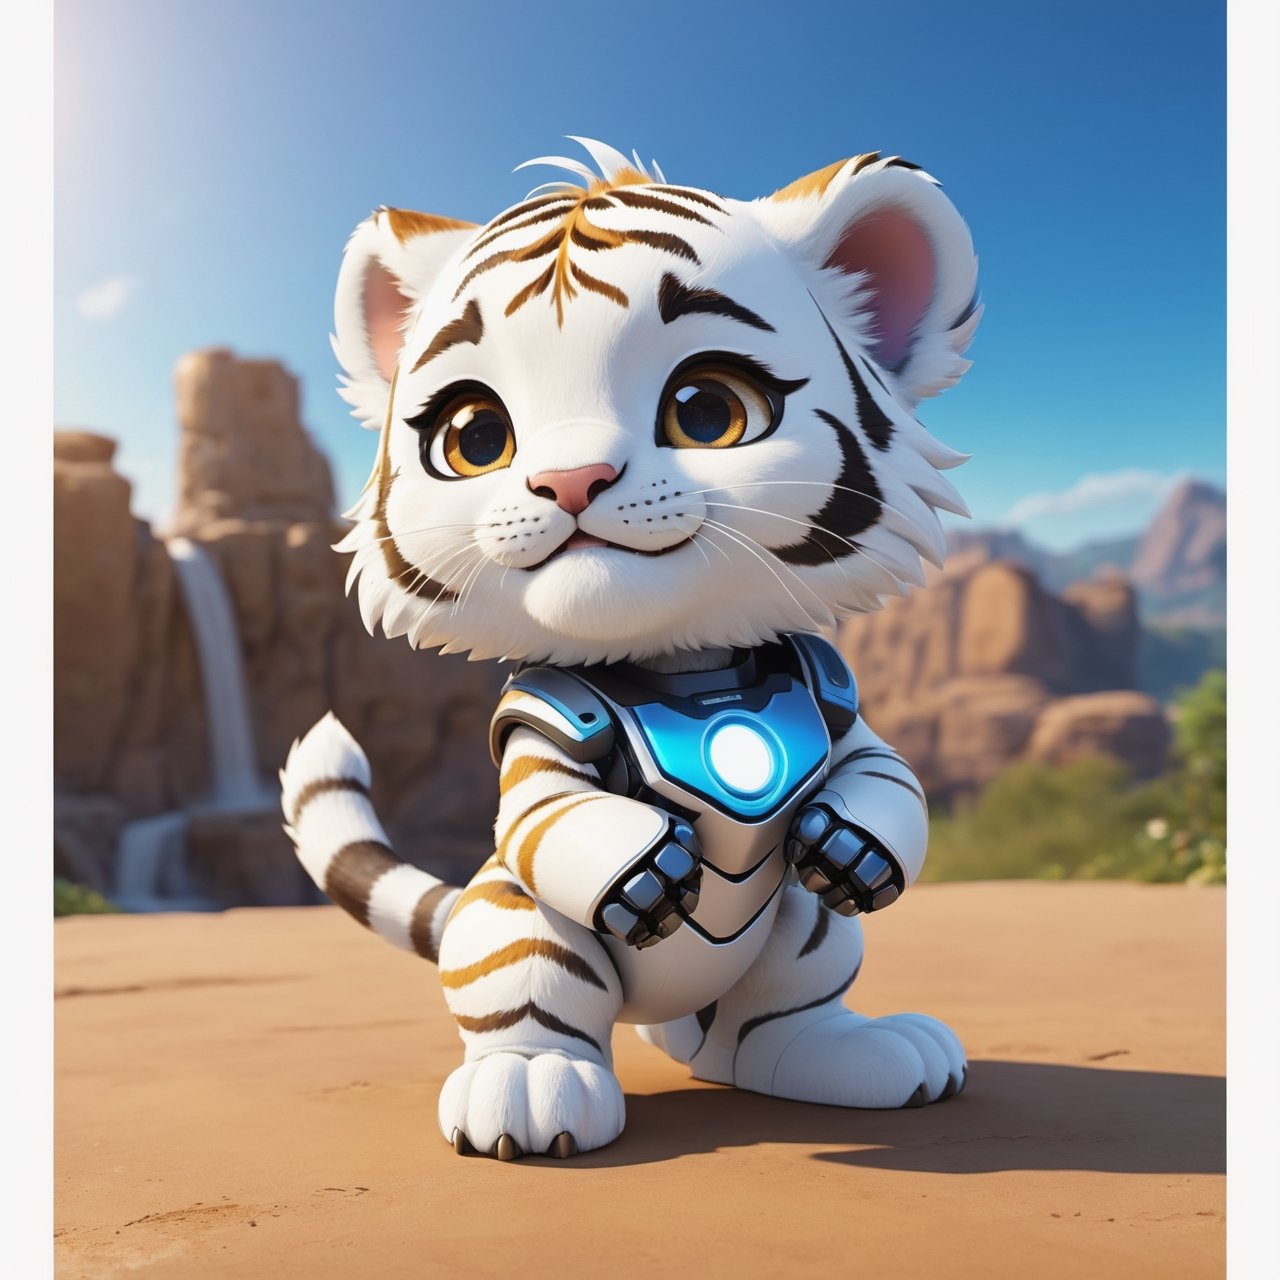 (masterpiece:1.2, highest quality), (realistic, photo_realistic:1.9)
1chibi_tiger, Cute chibi white tiger, happy face, Chest written: "TA", (Designer look holding a paintbrush in one hand), white with blue, (detailed background), (gradients), colorful, detailed landscape, visual key, shiny skin. Modern place, Action camera. Portrait film. Standard lens. Golden hour lighting.
sharp focus, 8k, UHD, high quality, frowning, intricate detailed, highly detailed, hyper-realistic,interior,robot white with blue,chibi emote style,Monster, wall-e